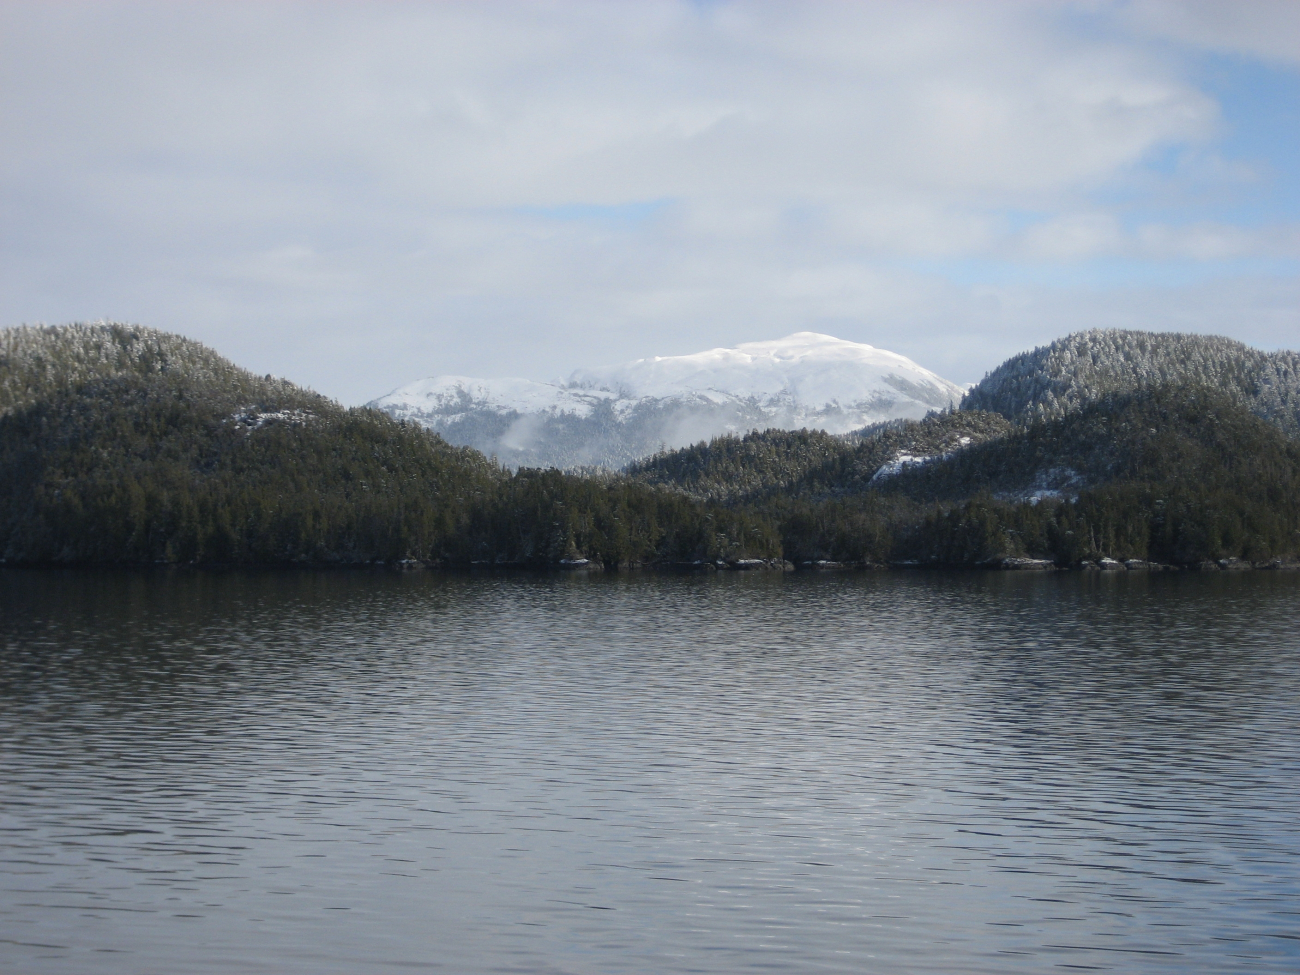 A sprinkling of snow at water level with mountains covered at higher elevations